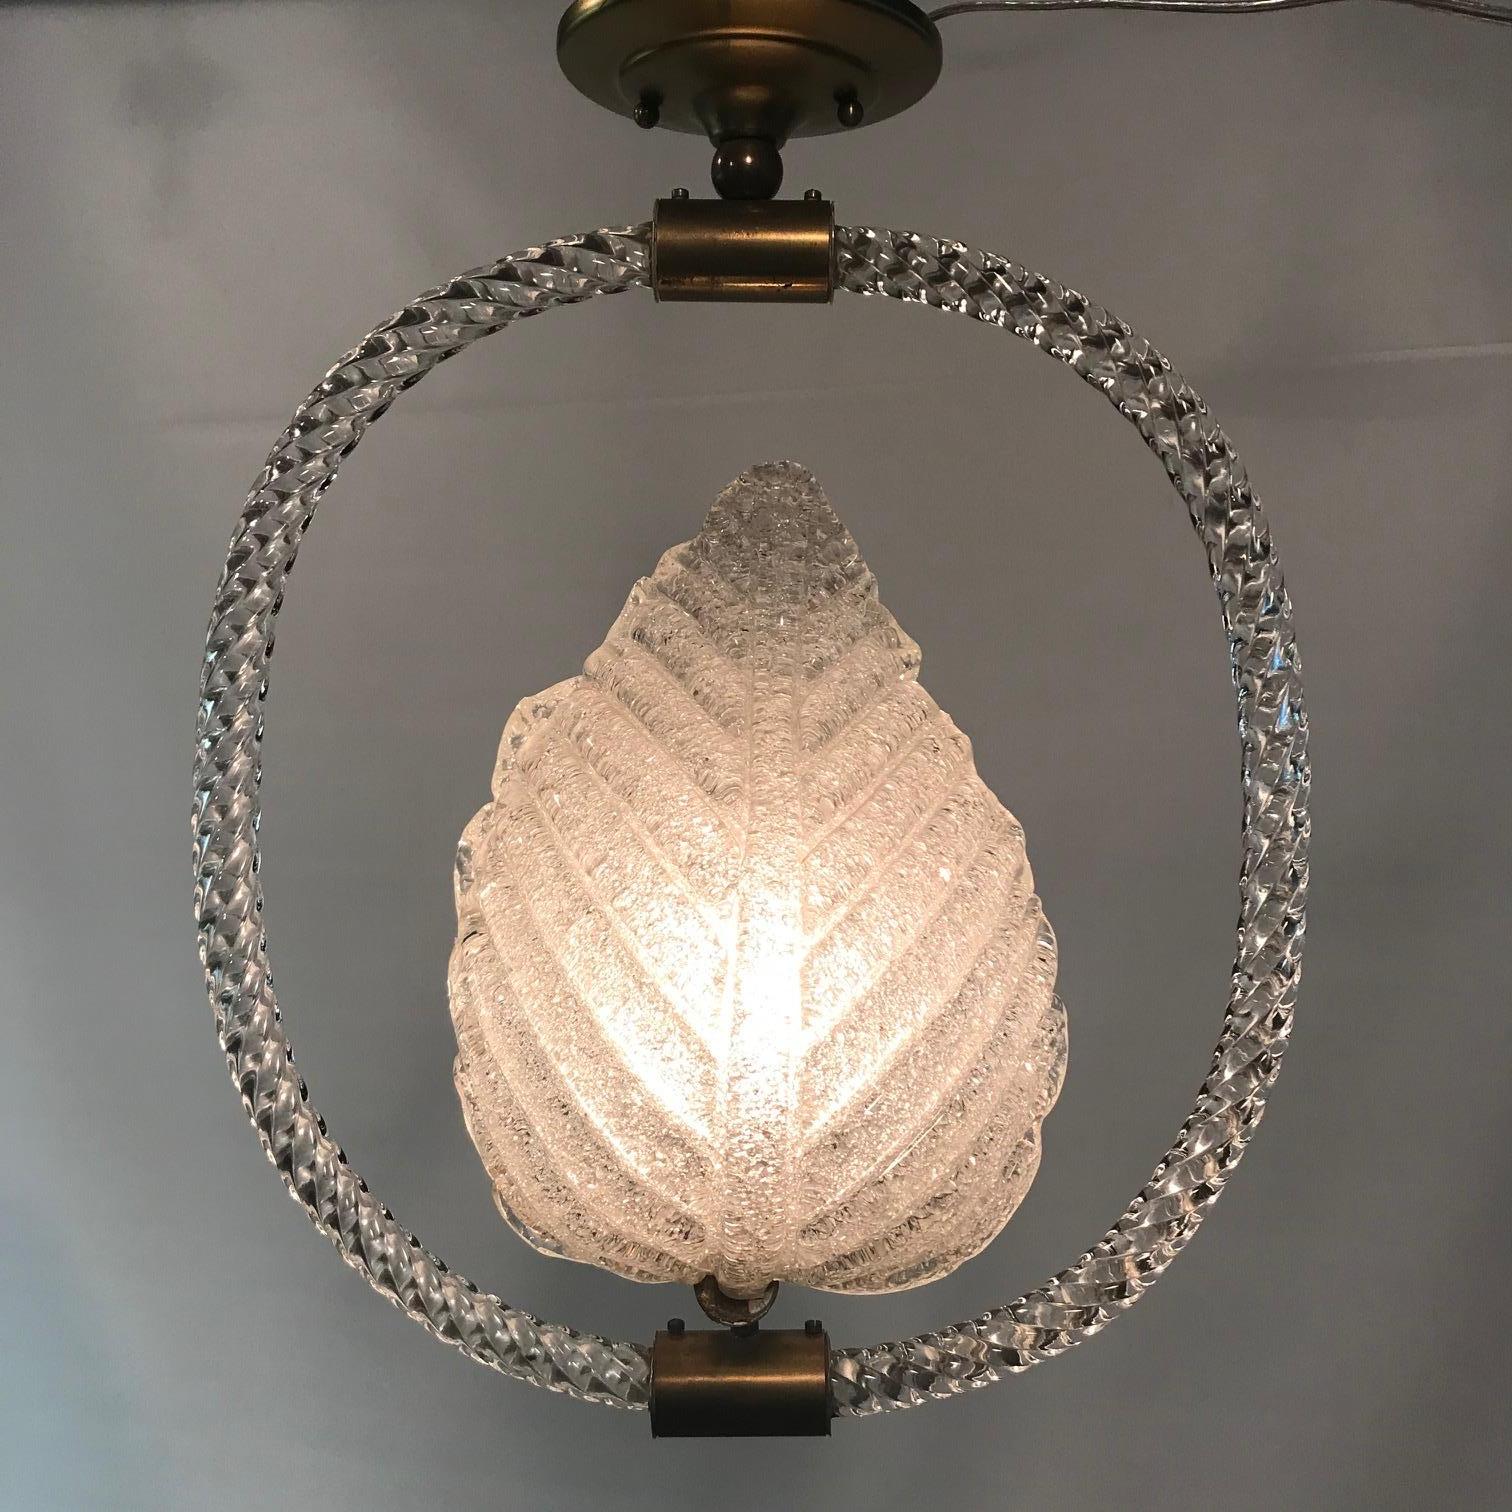 Pair of Moderne aventurine glass Murano leaf-form hanging fixtures each suspended in twisted glass rope circle by a brass shank, designed by Ercole Barovier for Barovier and Toso. 